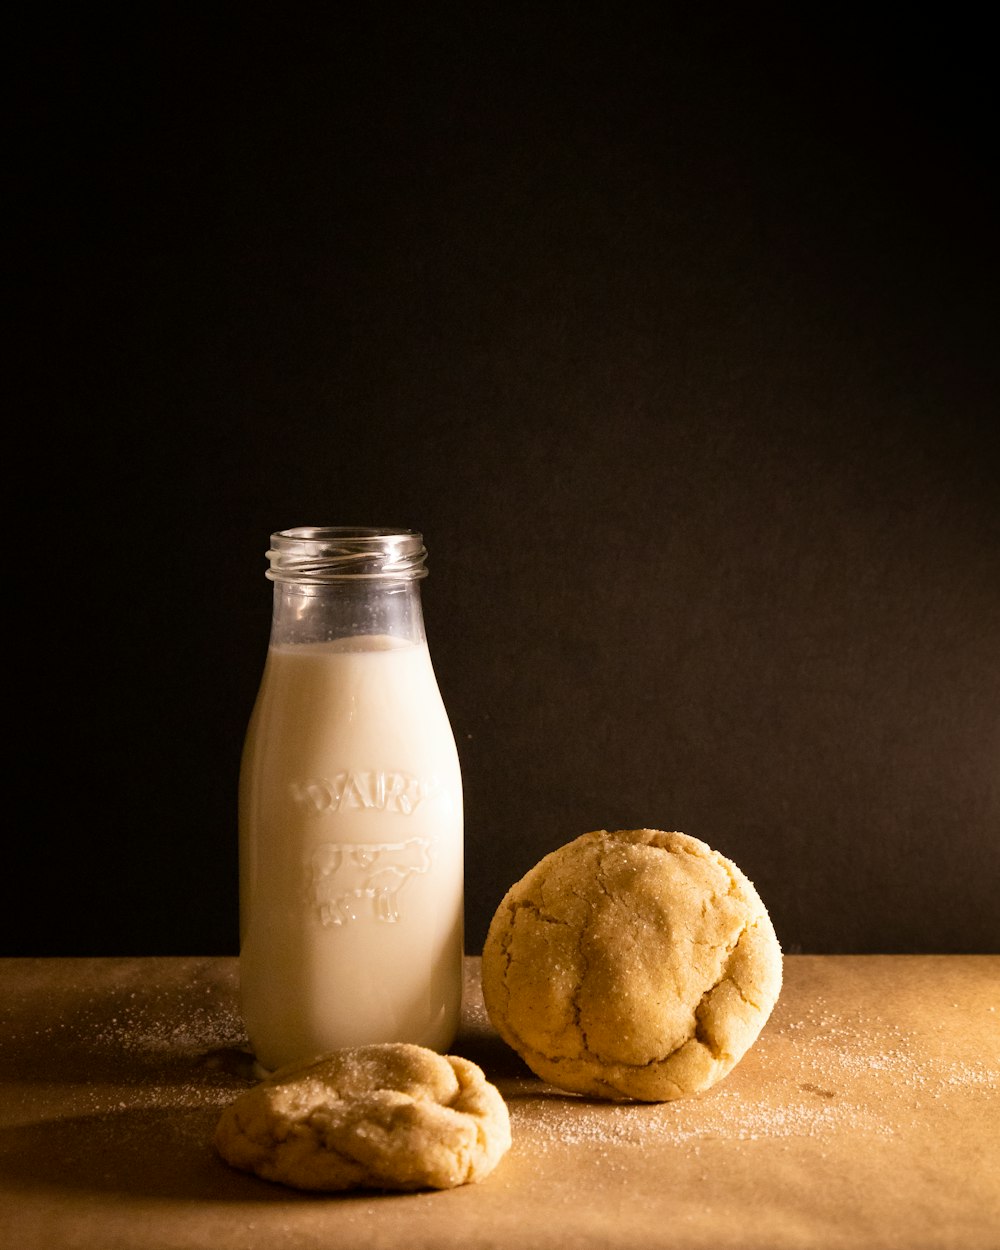 a bottle of milk and a cookie on a table